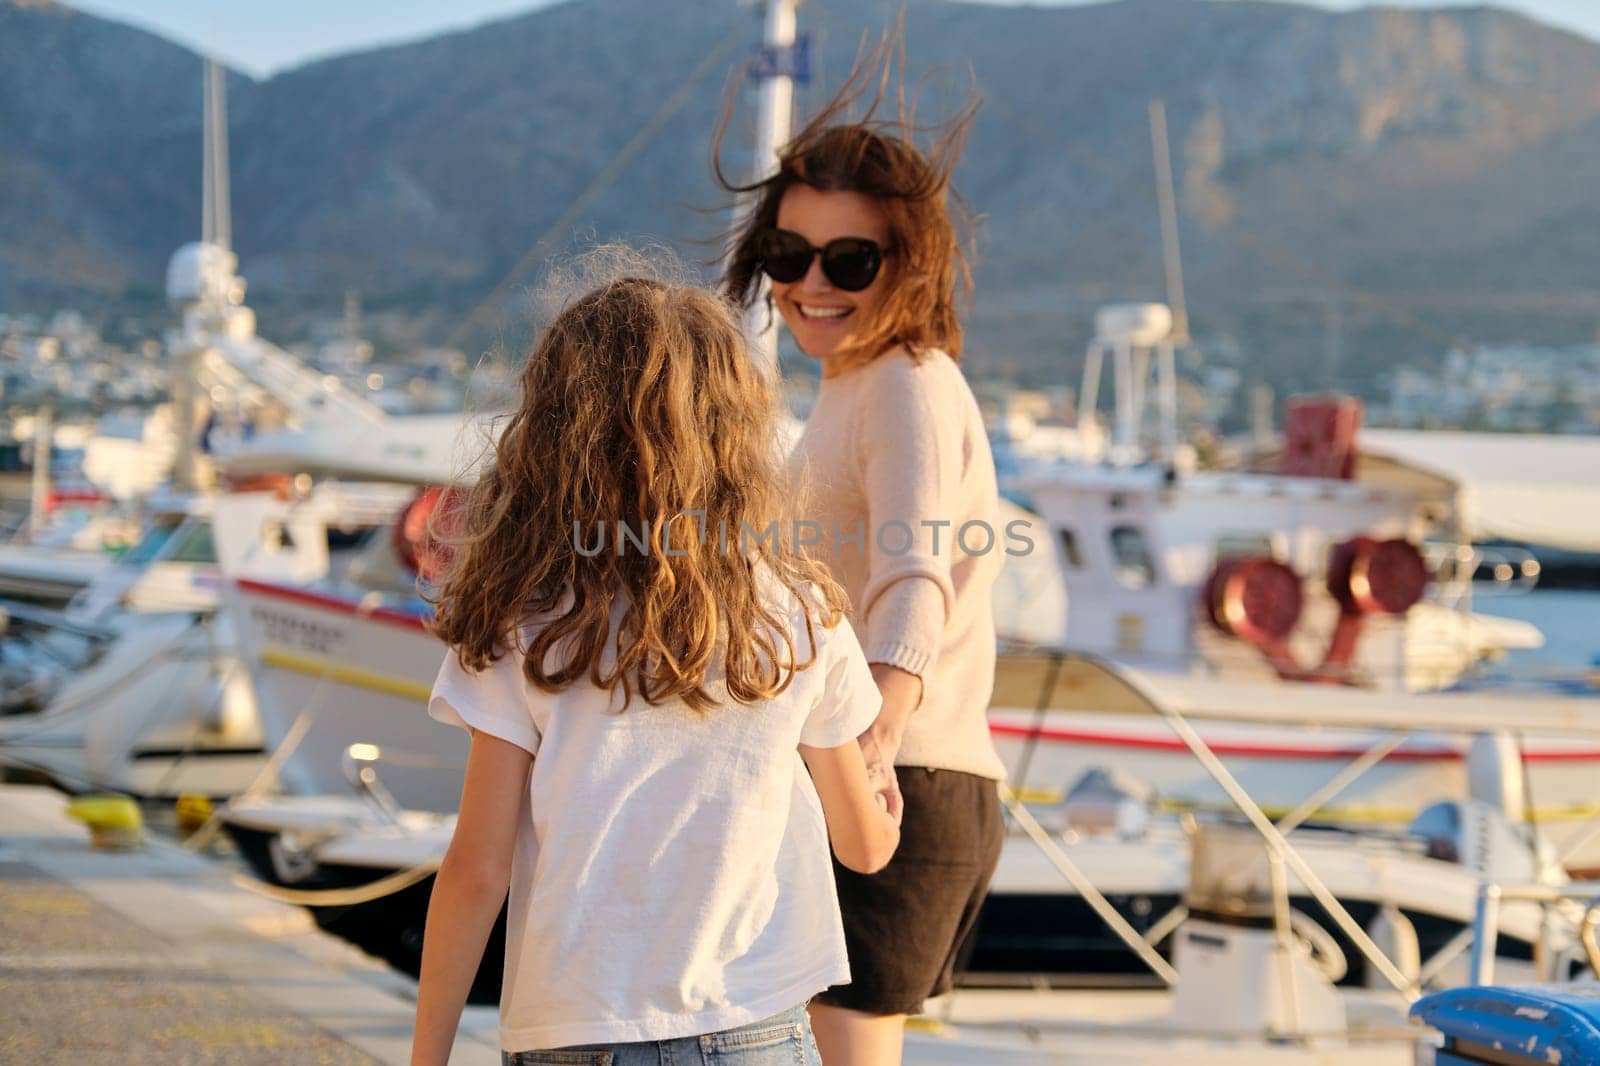 Happy mother and daughter child walking together holding hands along seafront. Marina for yachts, sunset on sea, scenic mountains background. Family, love, travel, lifestyle, vacation concept